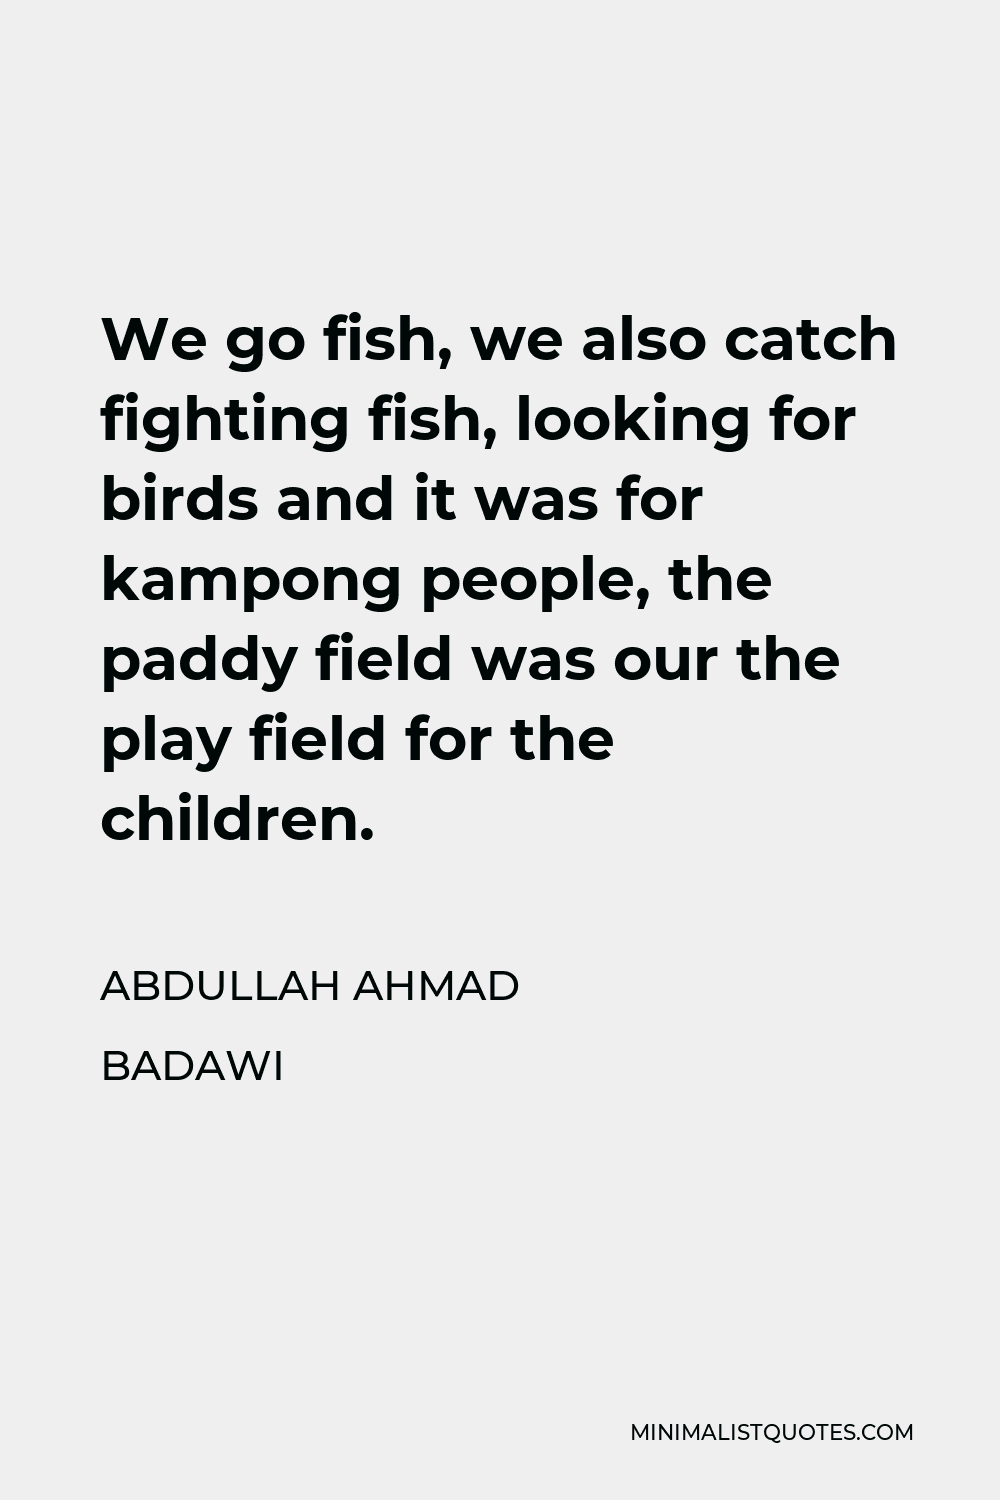 Abdullah Ahmad Badawi Quote - We go fish, we also catch fighting fish, looking for birds and it was for kampong people, the paddy field was our the play field for the children.